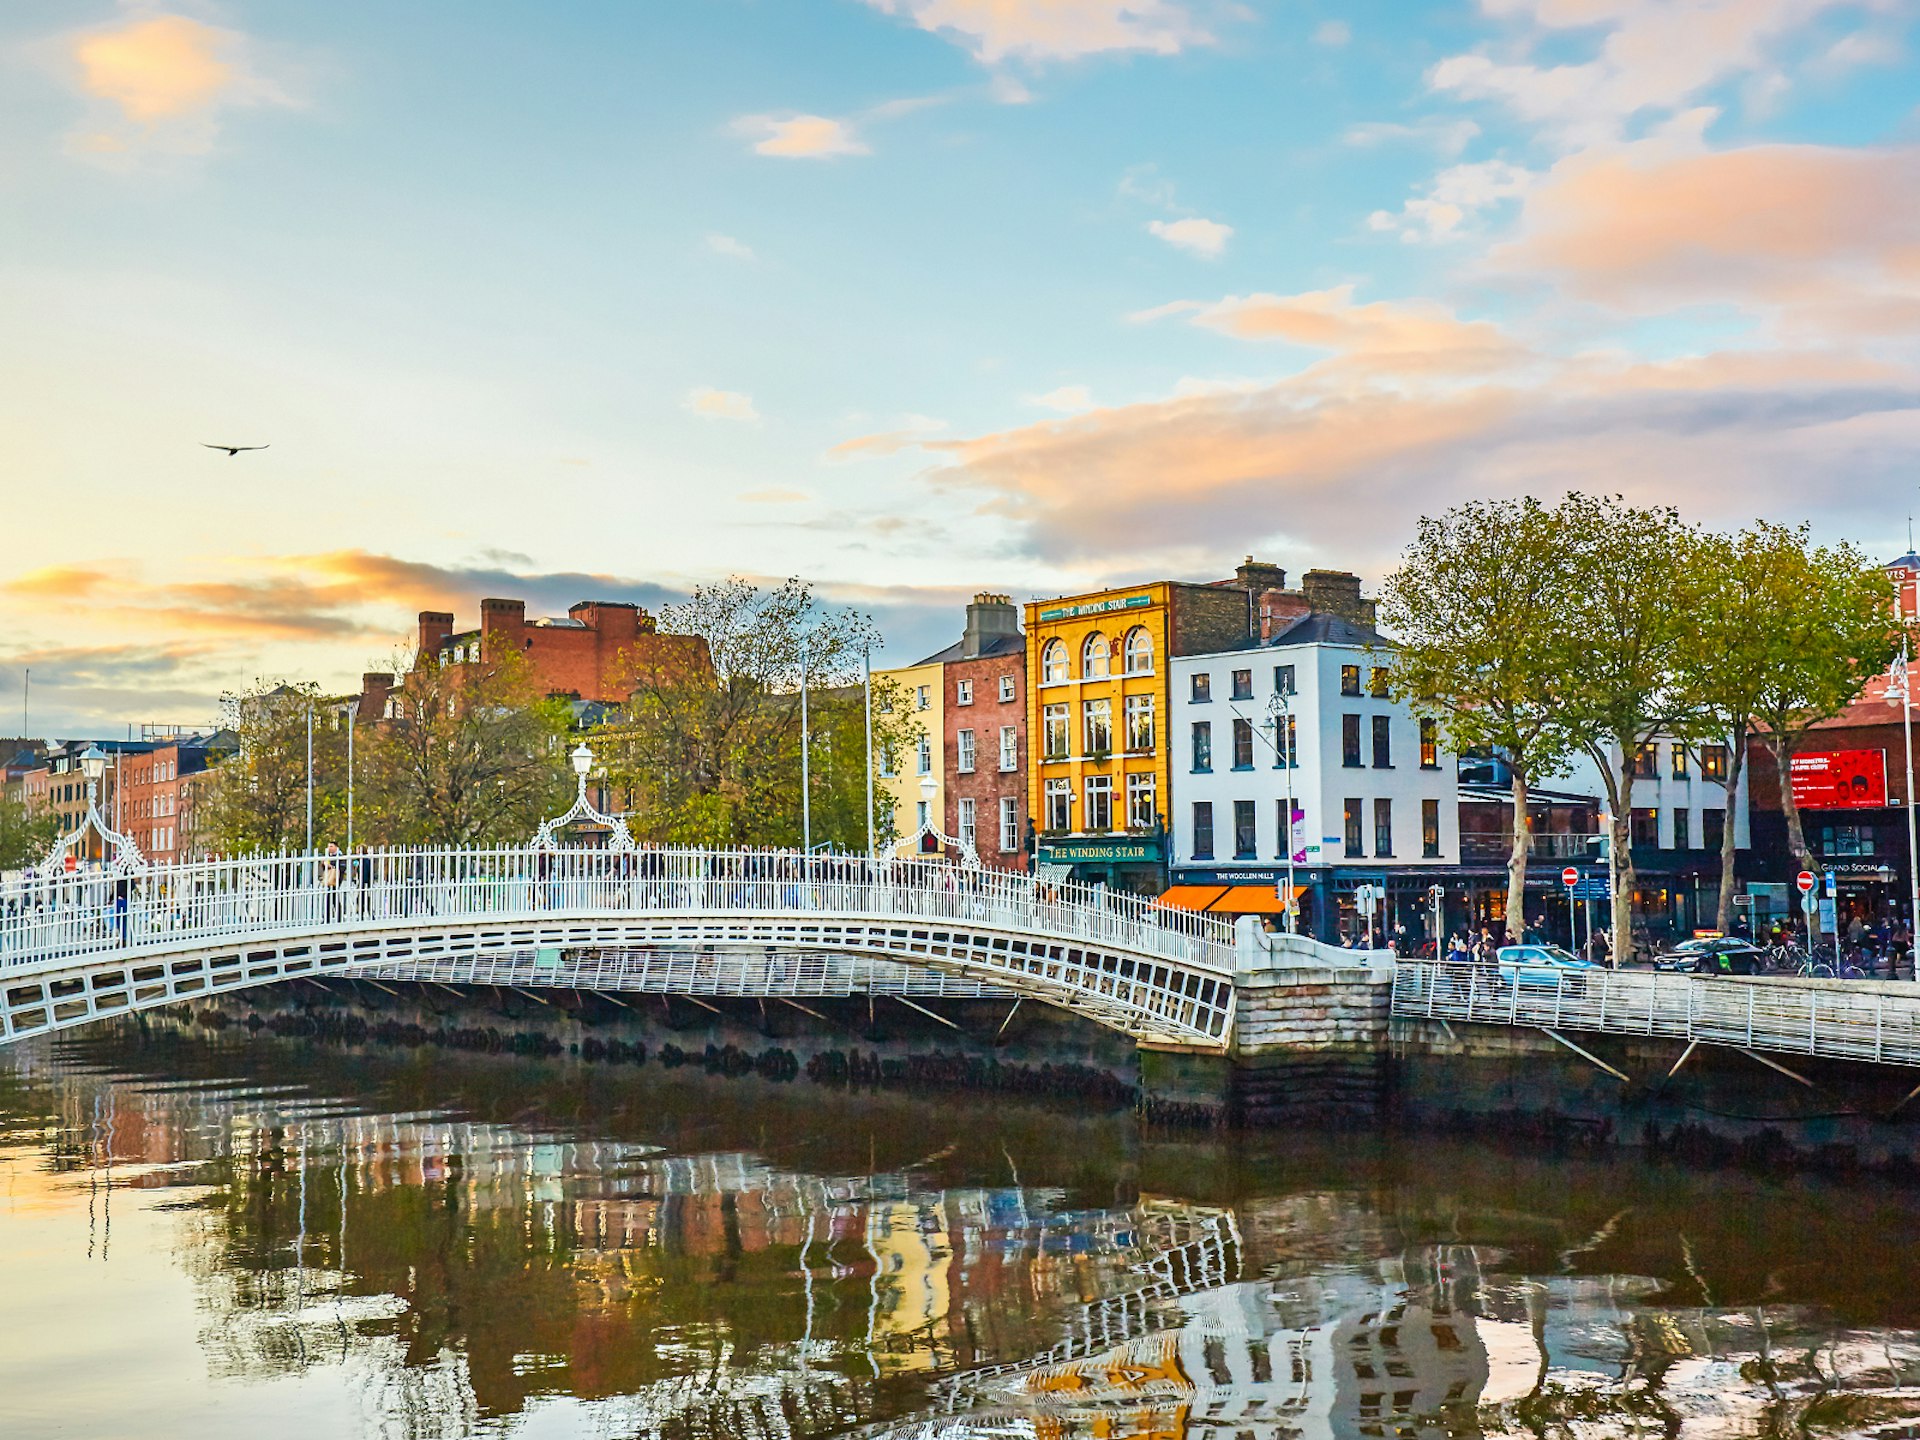 The Ha'penny Bridge over the River Liffey with colourful buildings lining the riverside